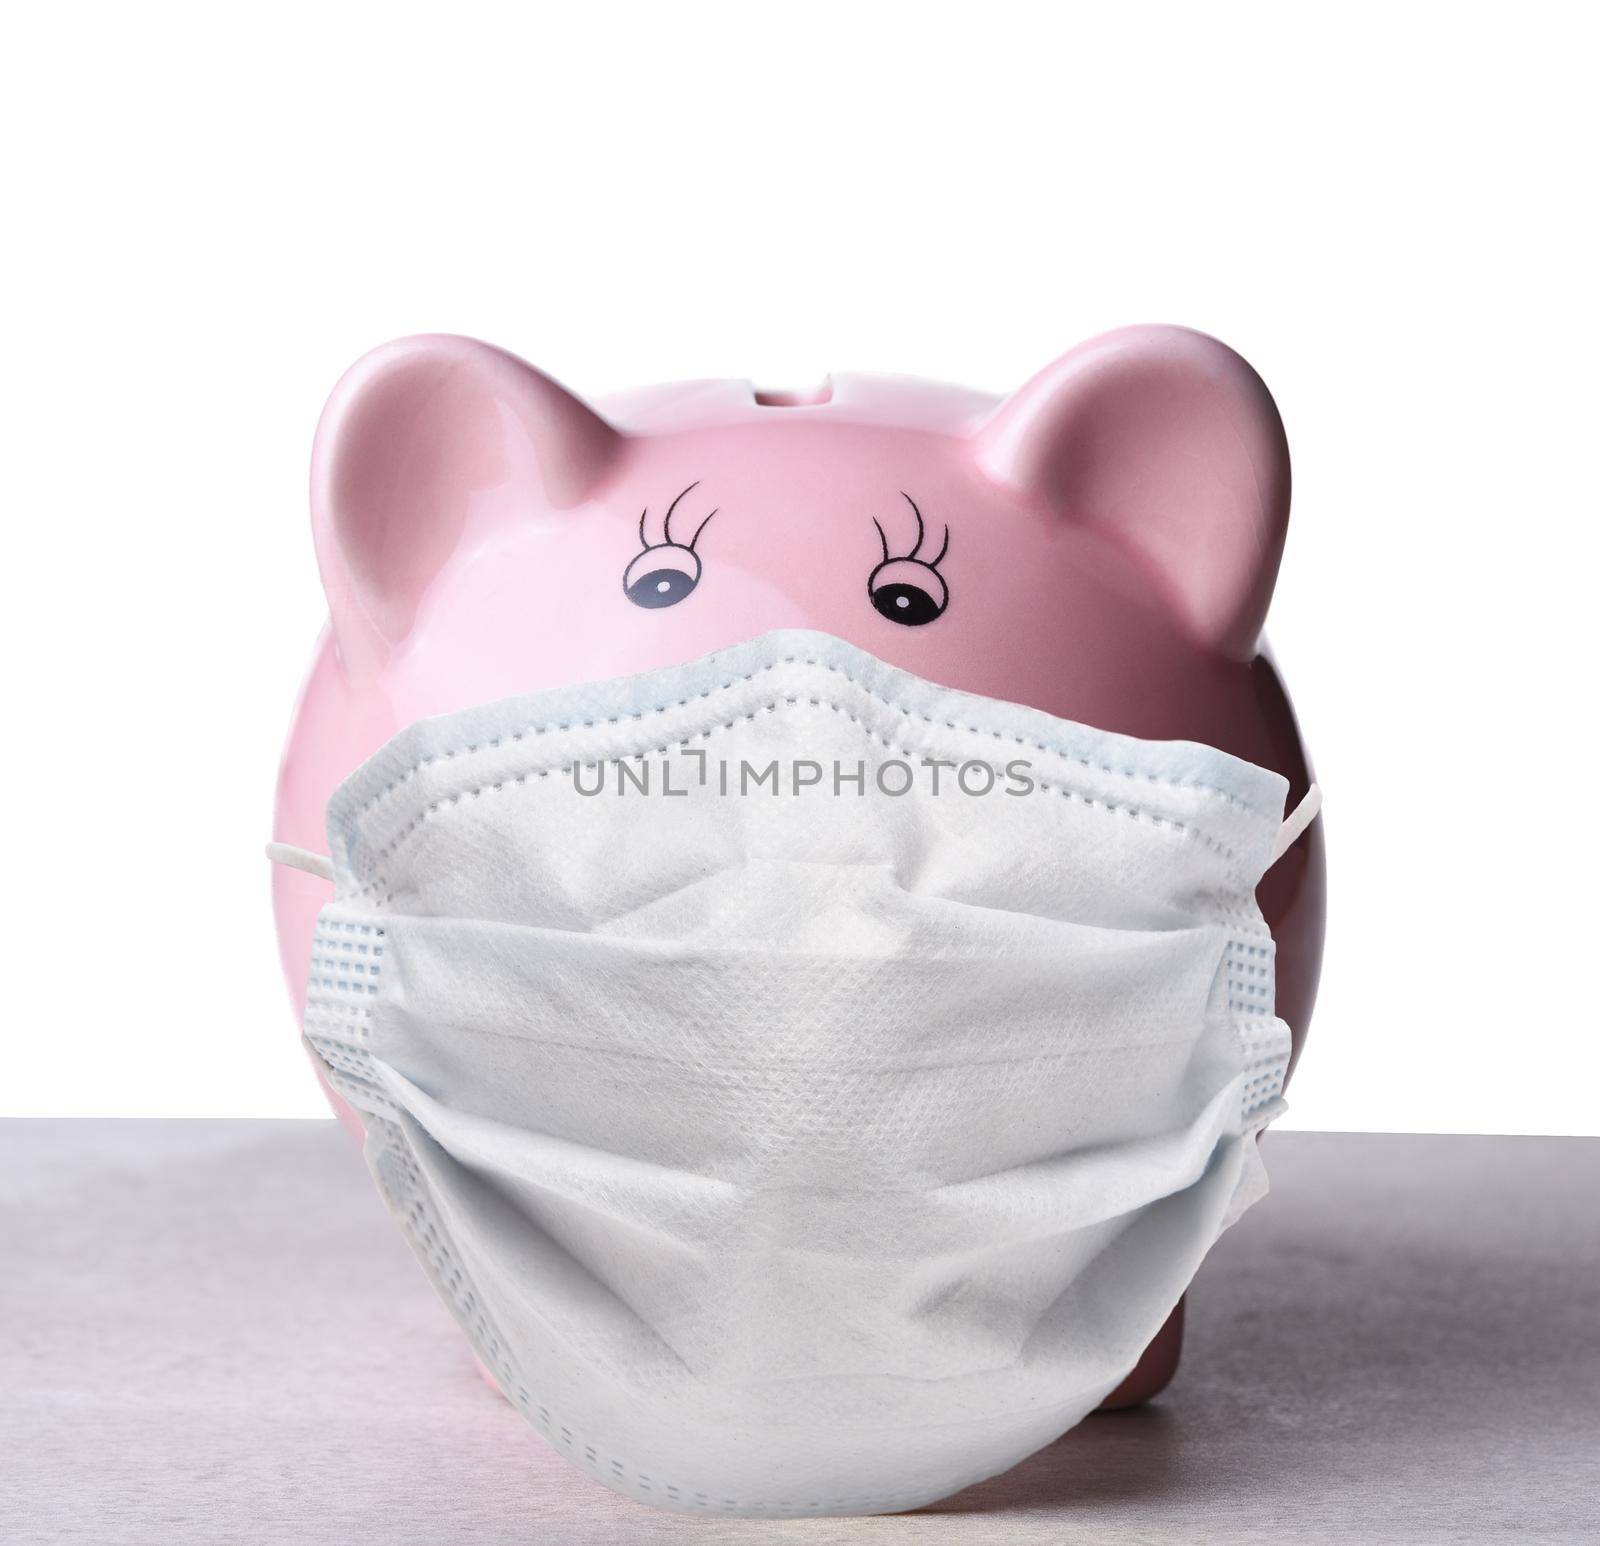 Closeup of a pink piggy bank wearing a COVID-19 surgical mask.